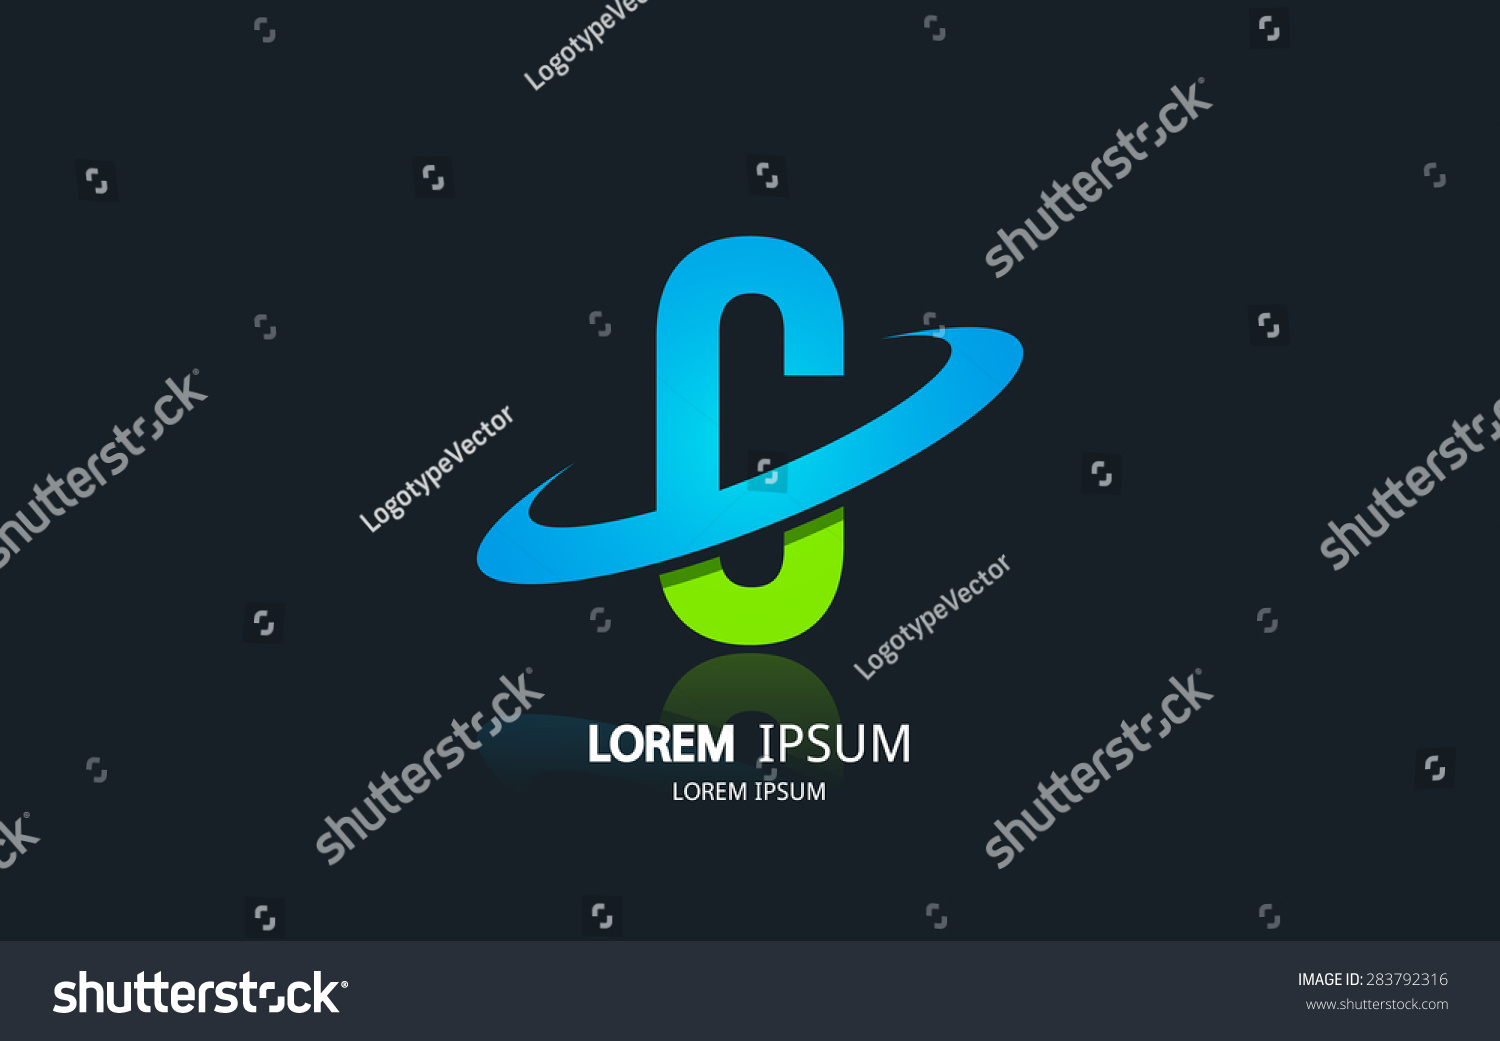 cool logos with the letter c